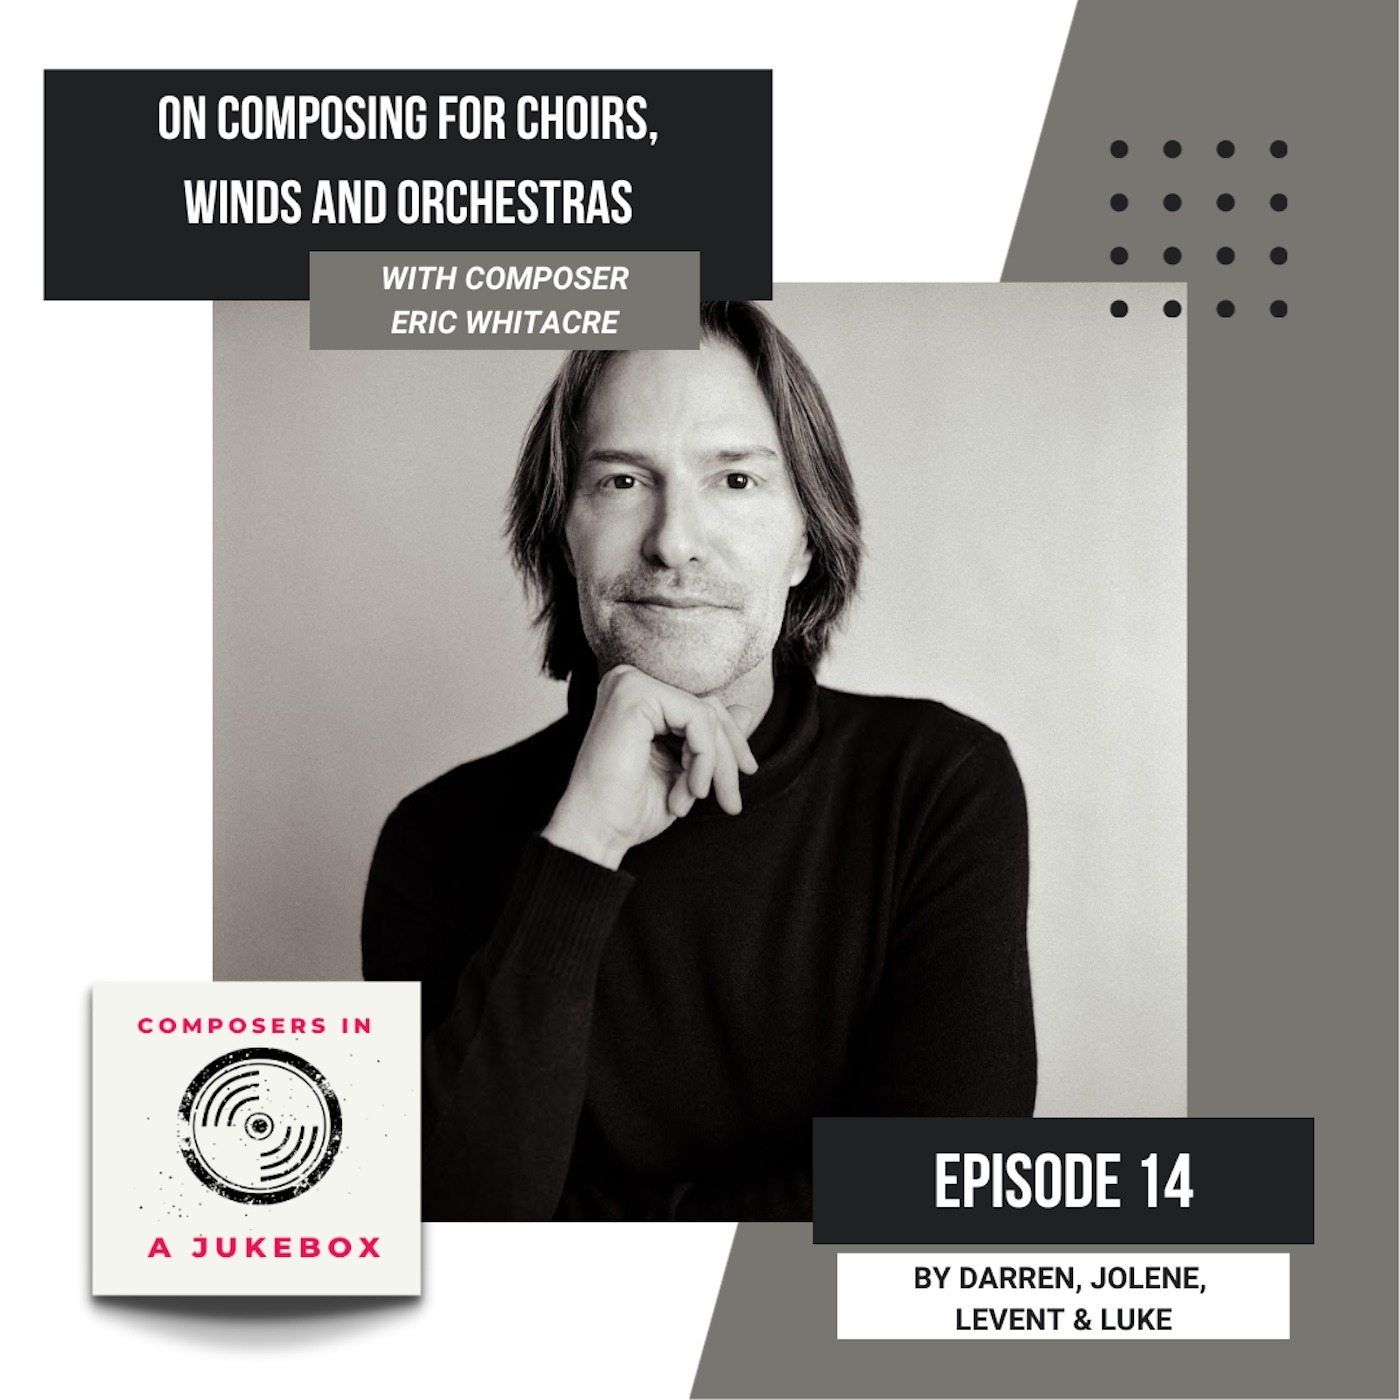 Eric Whitacre On Composing For Choirs, Winds, And Orchestras